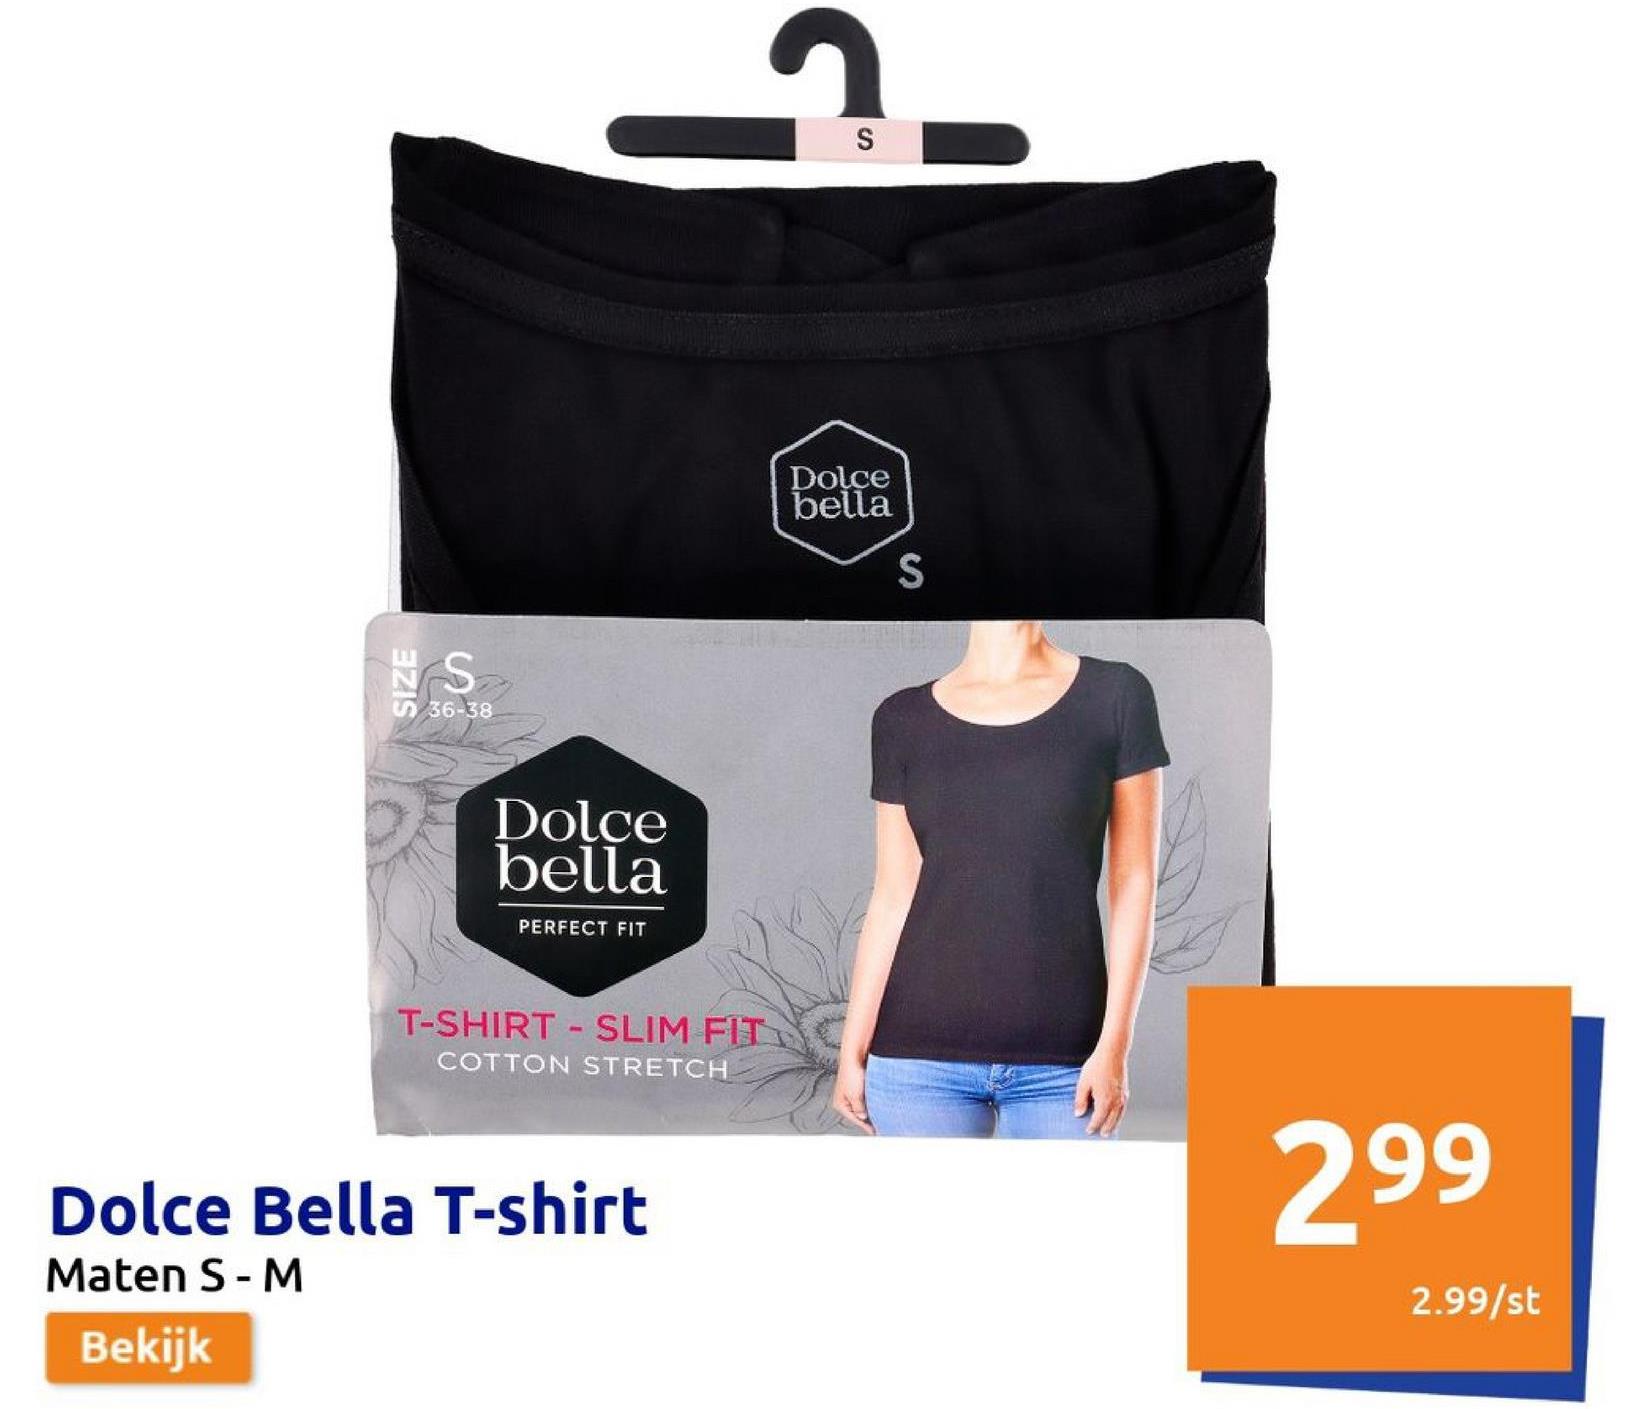 S
S36-38
Dolce
bella
PERFECT FIT
T-SHIRT SLIM FIT
COTTON STRETCH
Dolce Bella T-shirt
Maten S - M
Bekijk
S
Dolce
bella
S
299
2.99/st